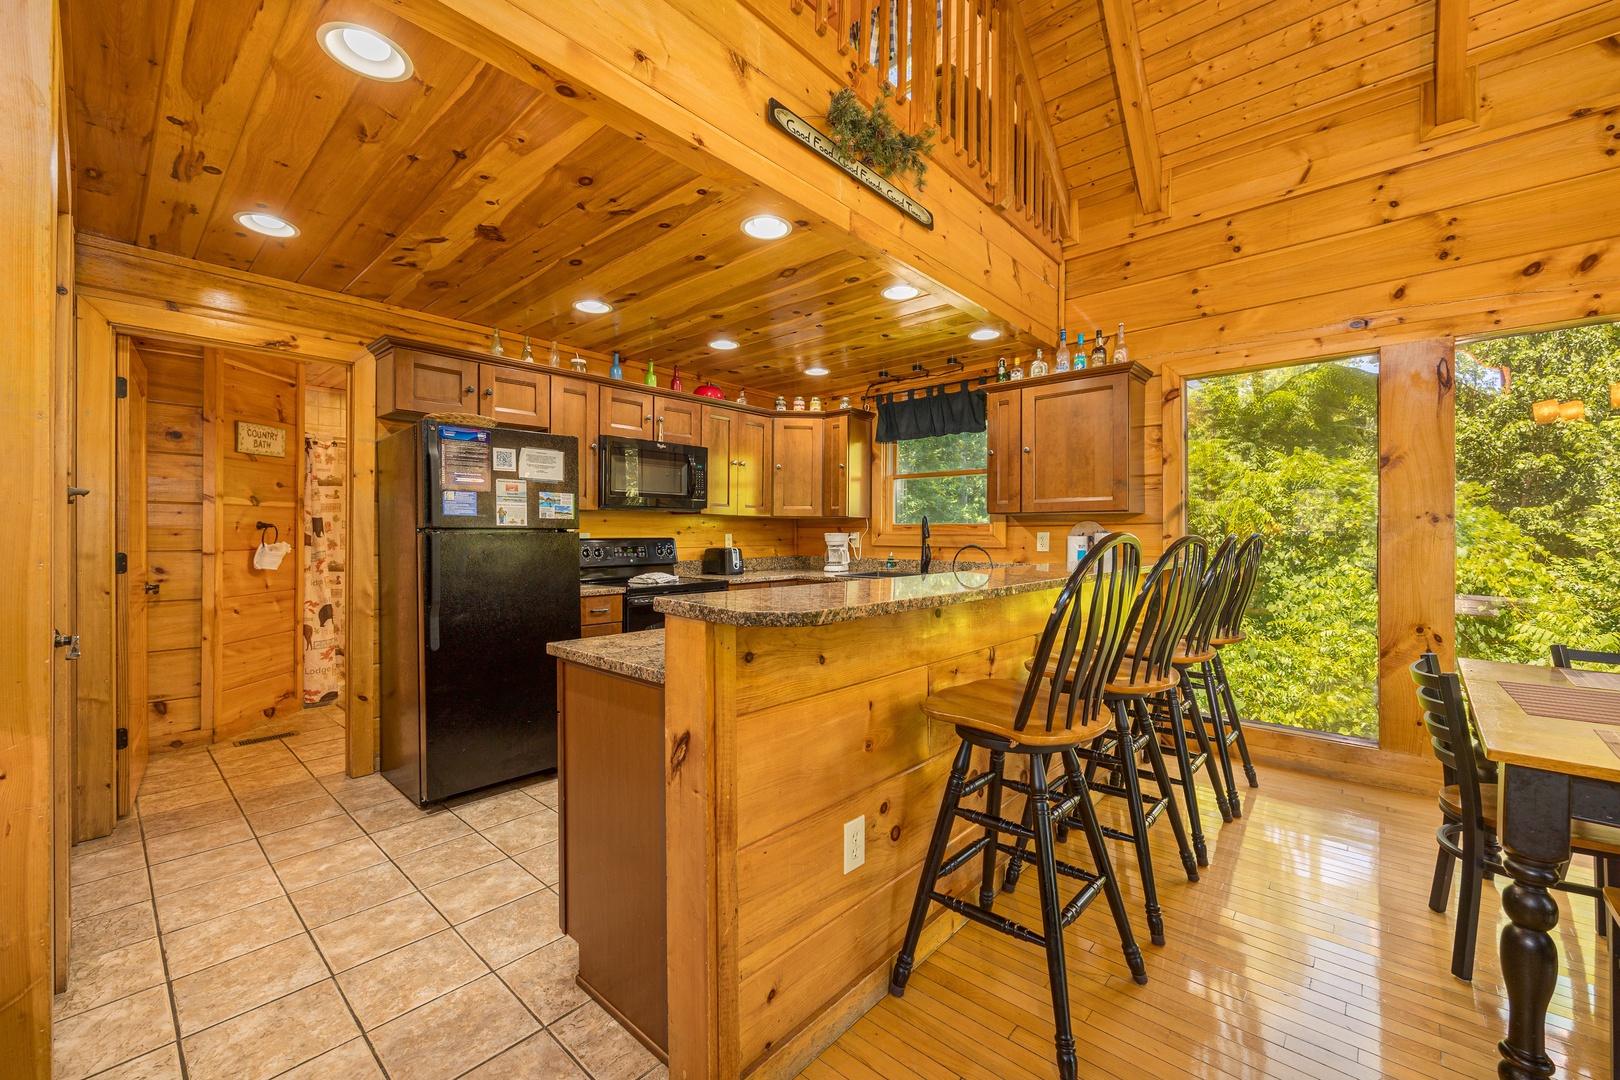 Kitchen seating at Moonbeams & Cabin Dreams, a 3 bedroom cabin rental located in Pigeon Forge